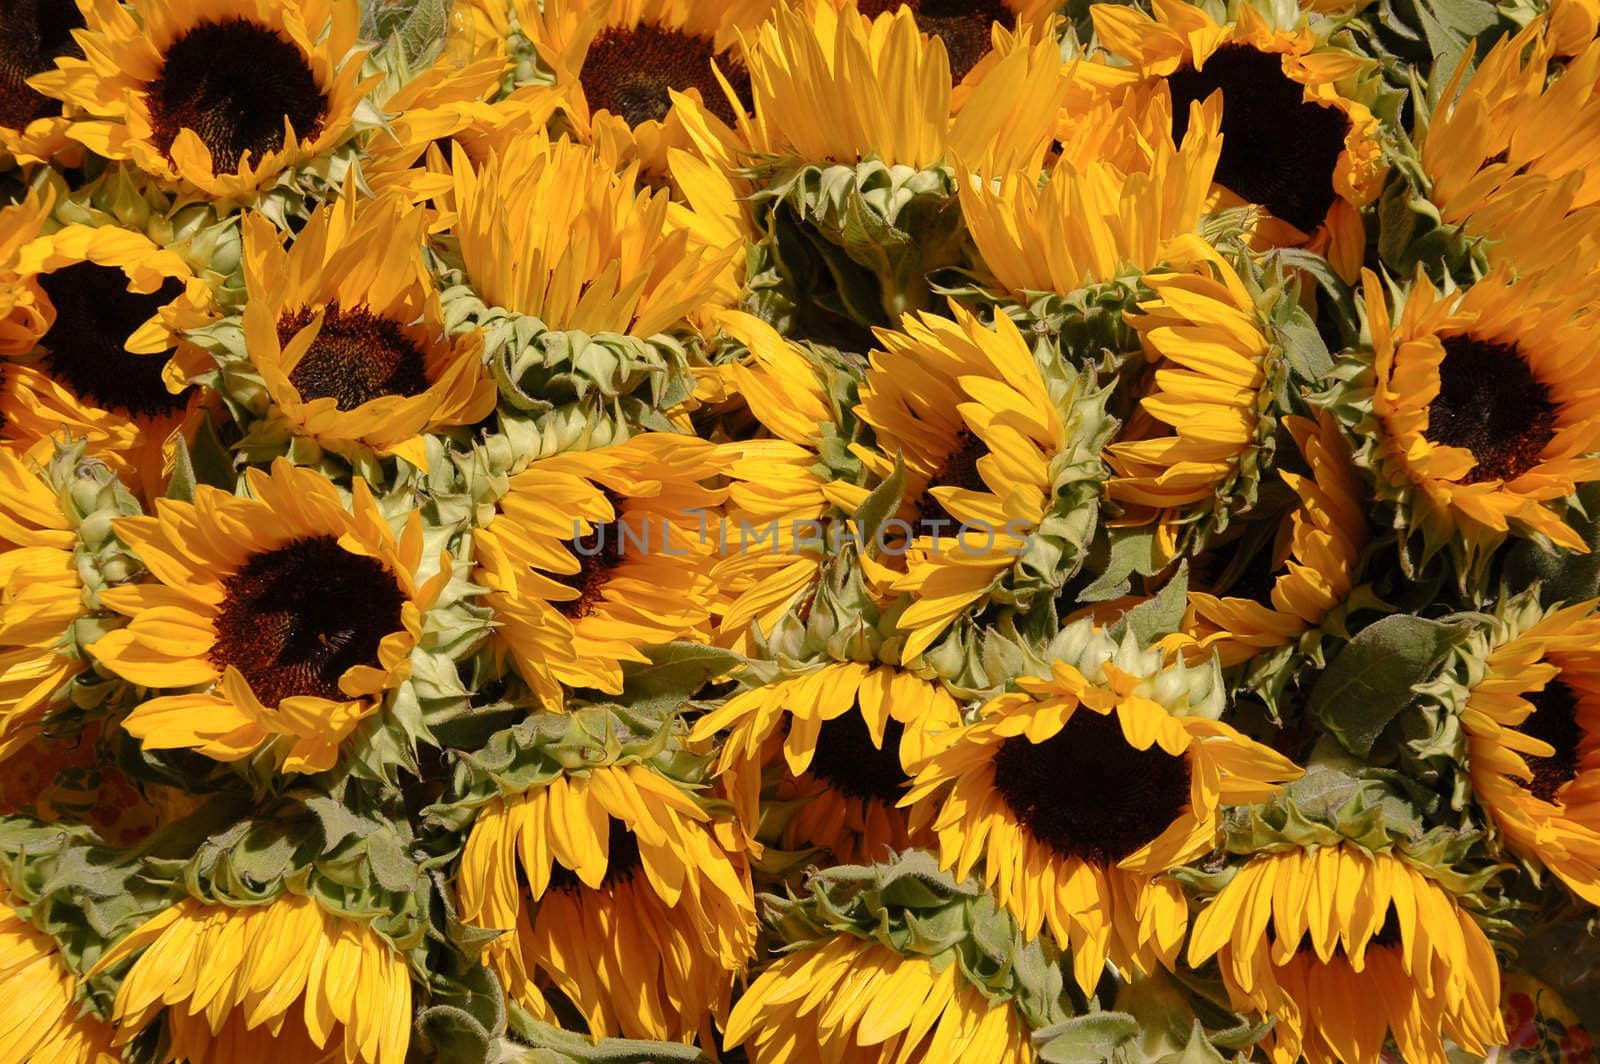 A large groupe of sunflowers.